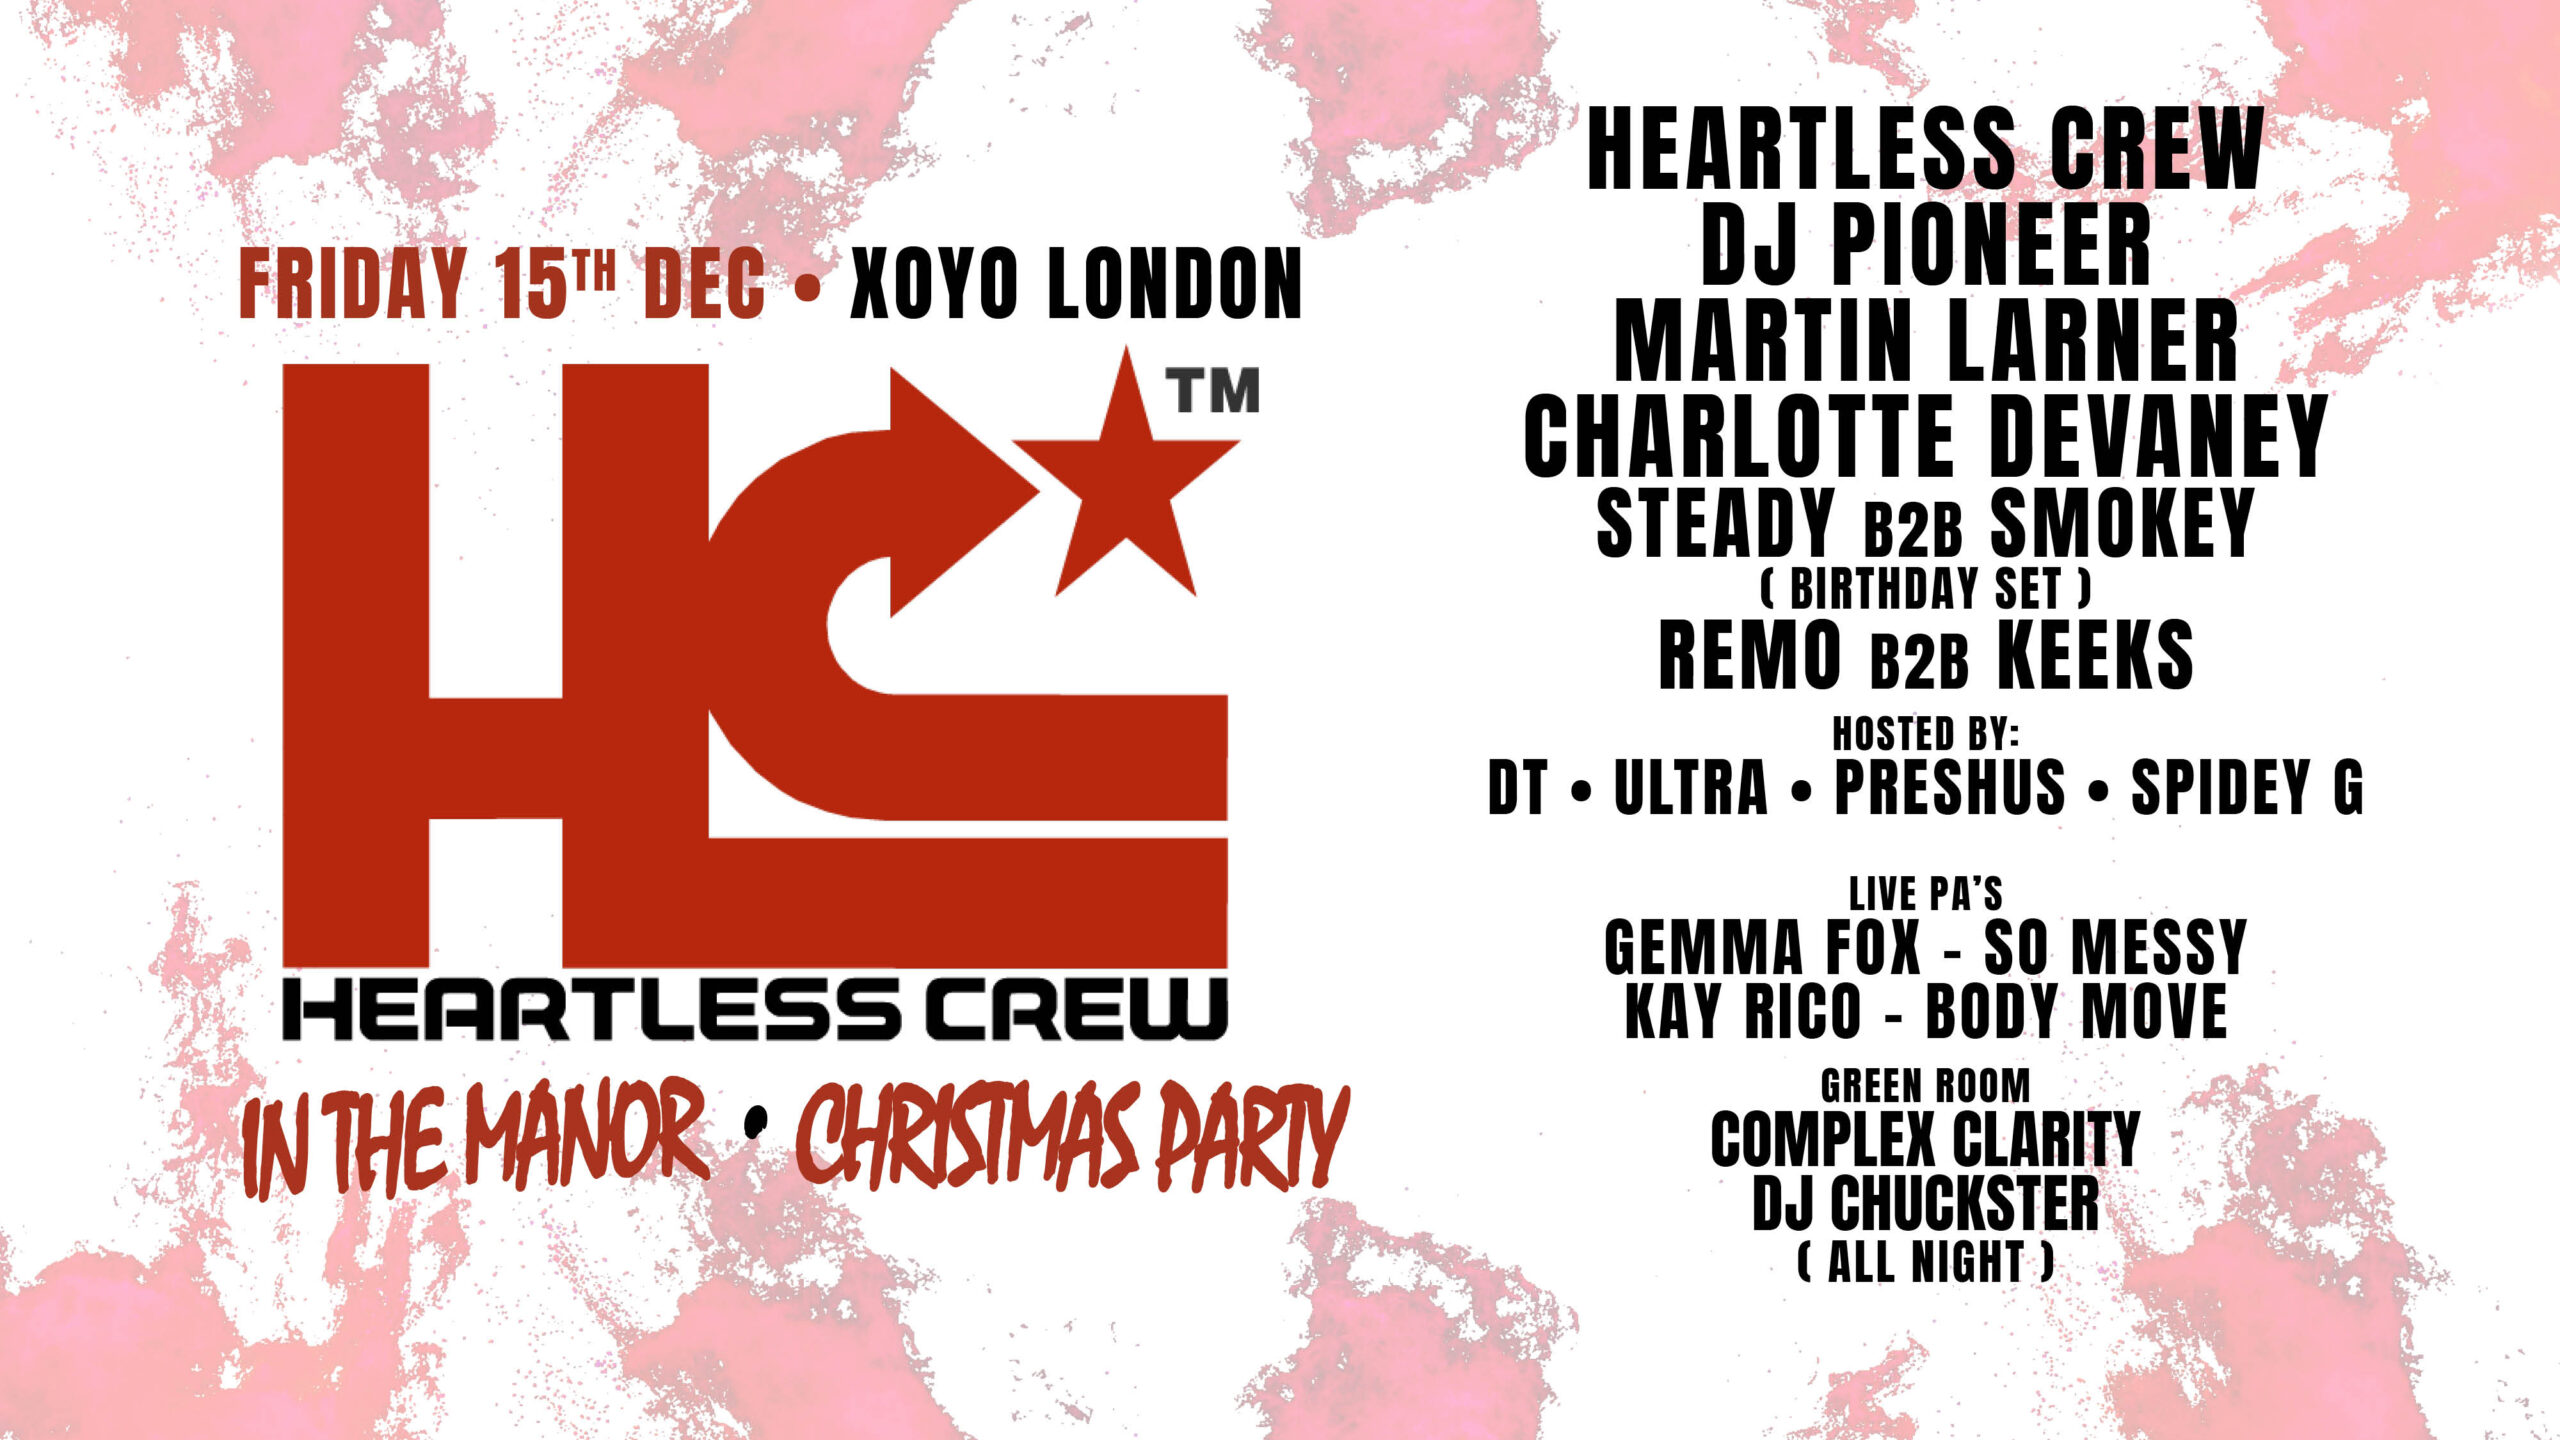 Heartless Crew In The Manor Christmas Party at XOYO London on Friday 15th December!